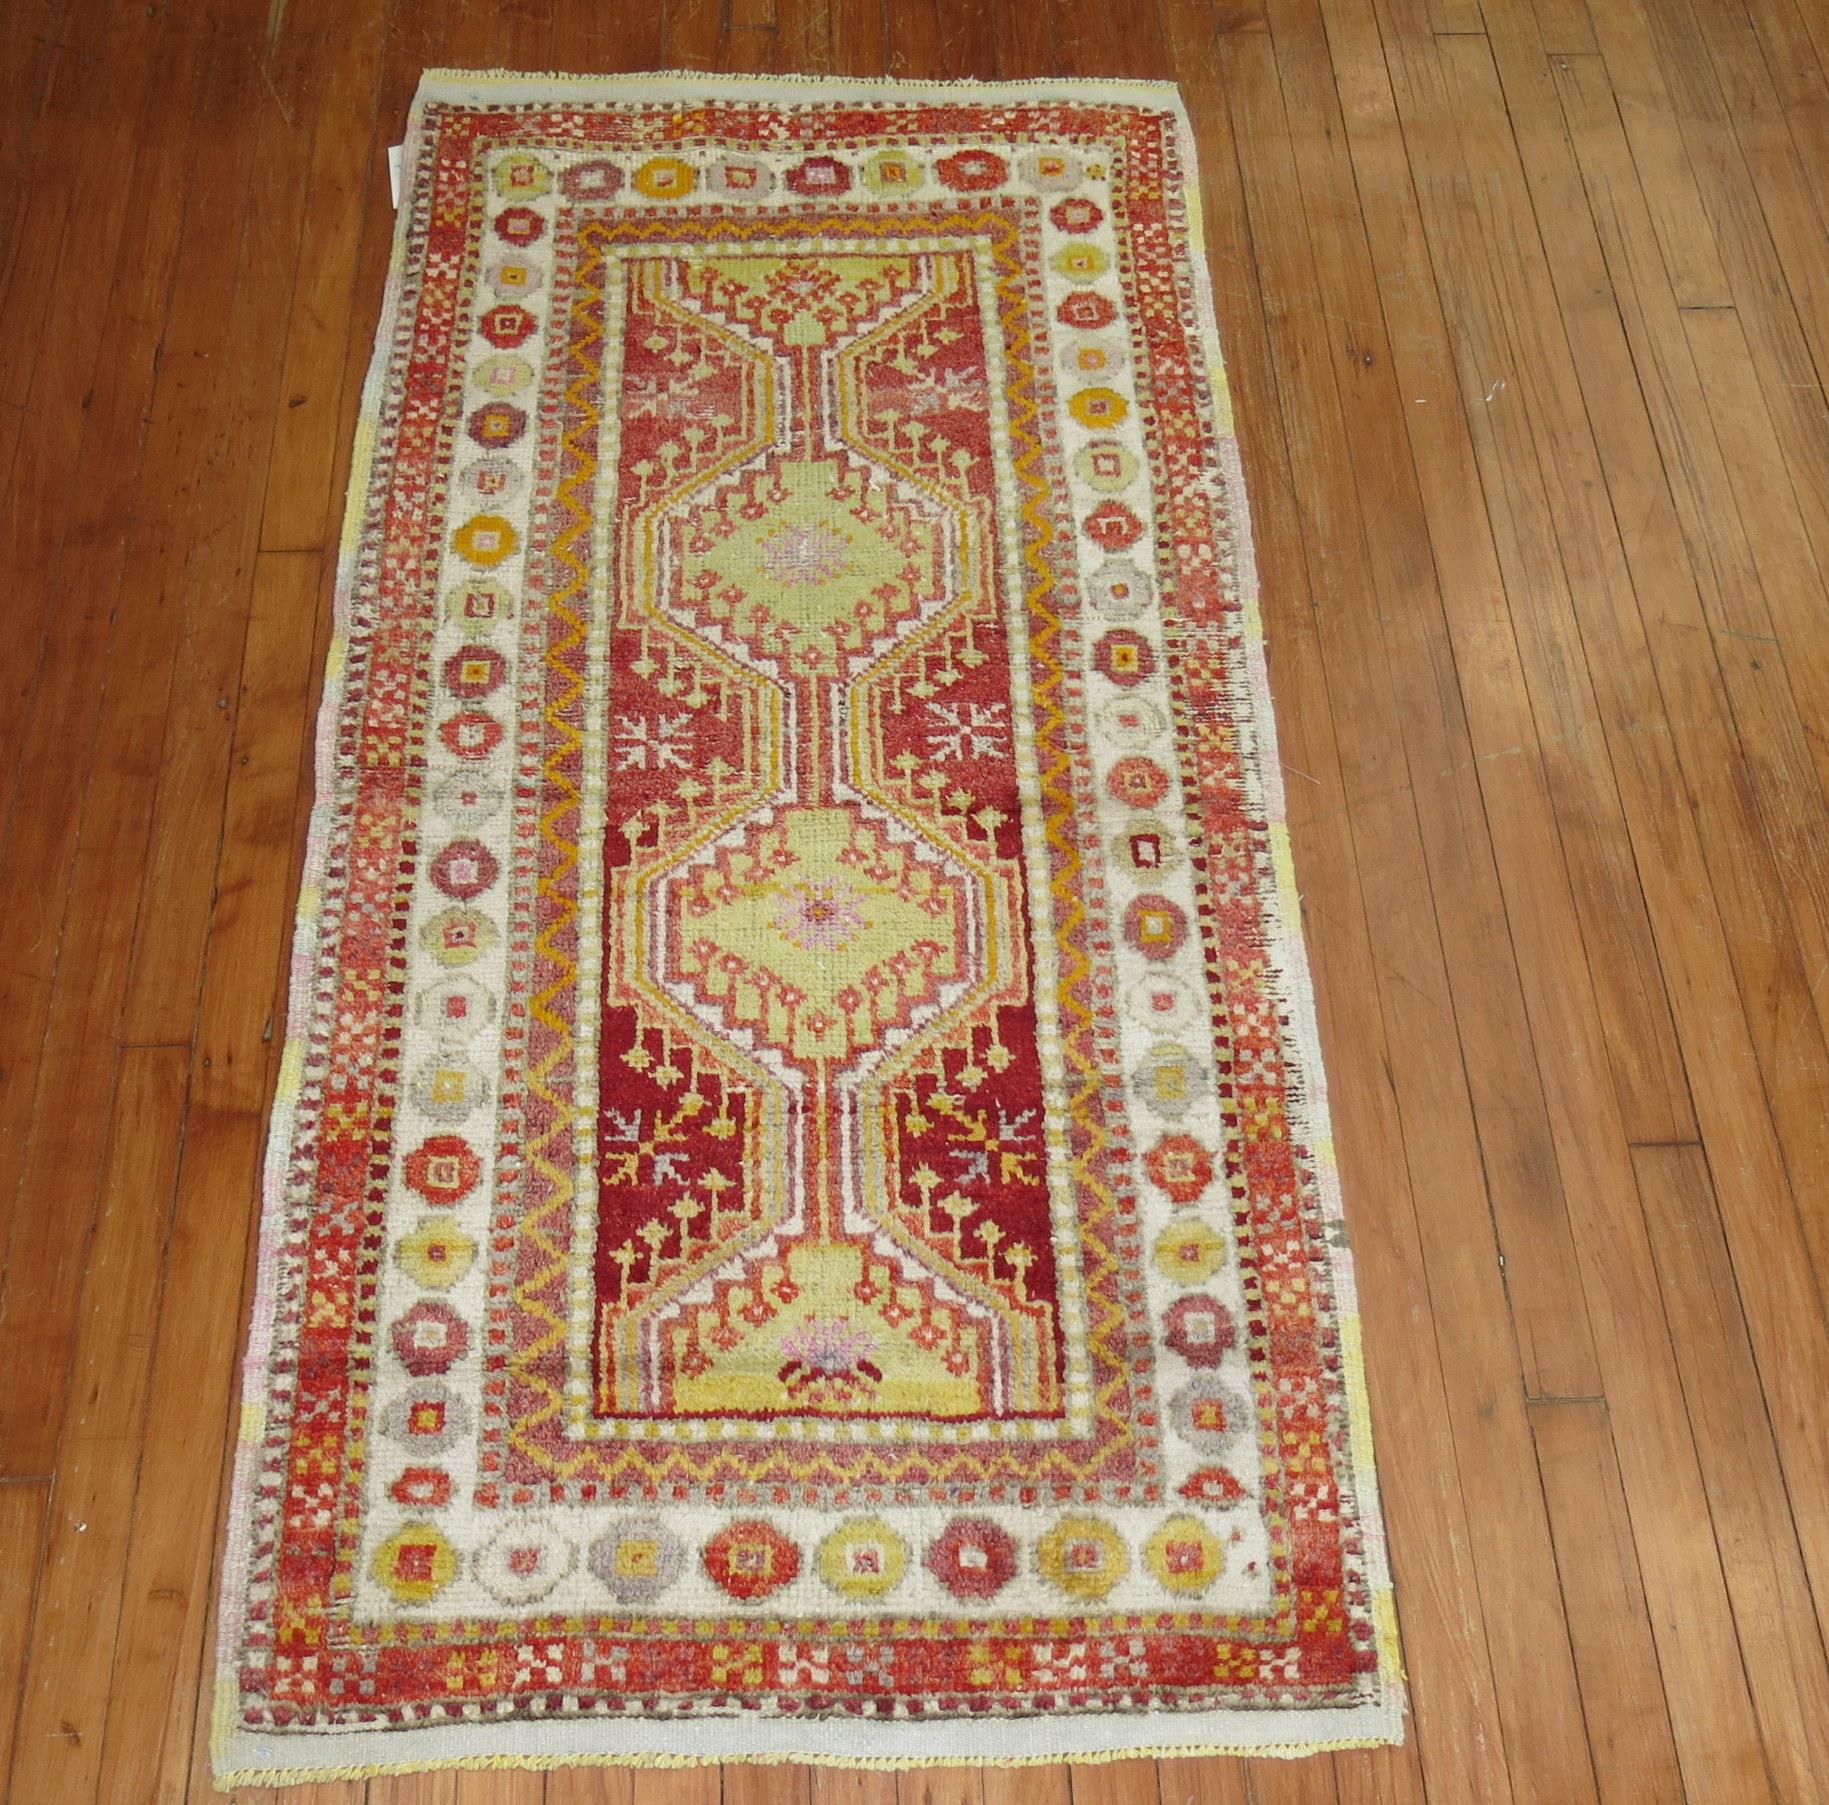 Mid 20th century tribal Turkish scatter size rug in bright red and green

Measures: 2'8